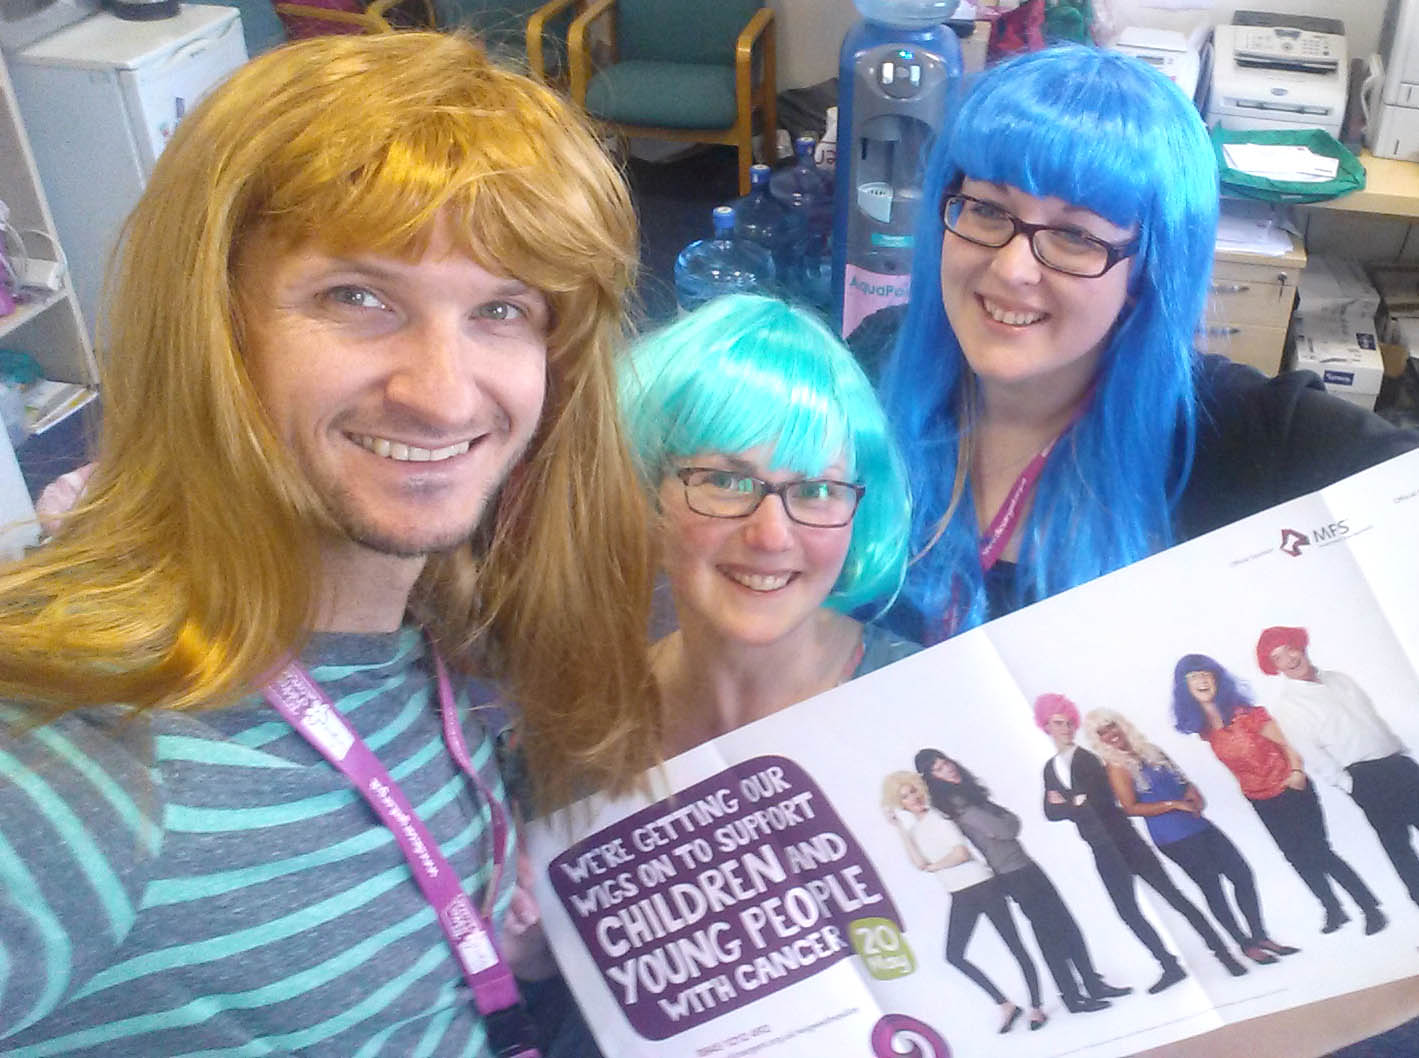 Wear a Wig for CLIC Sargent Charity